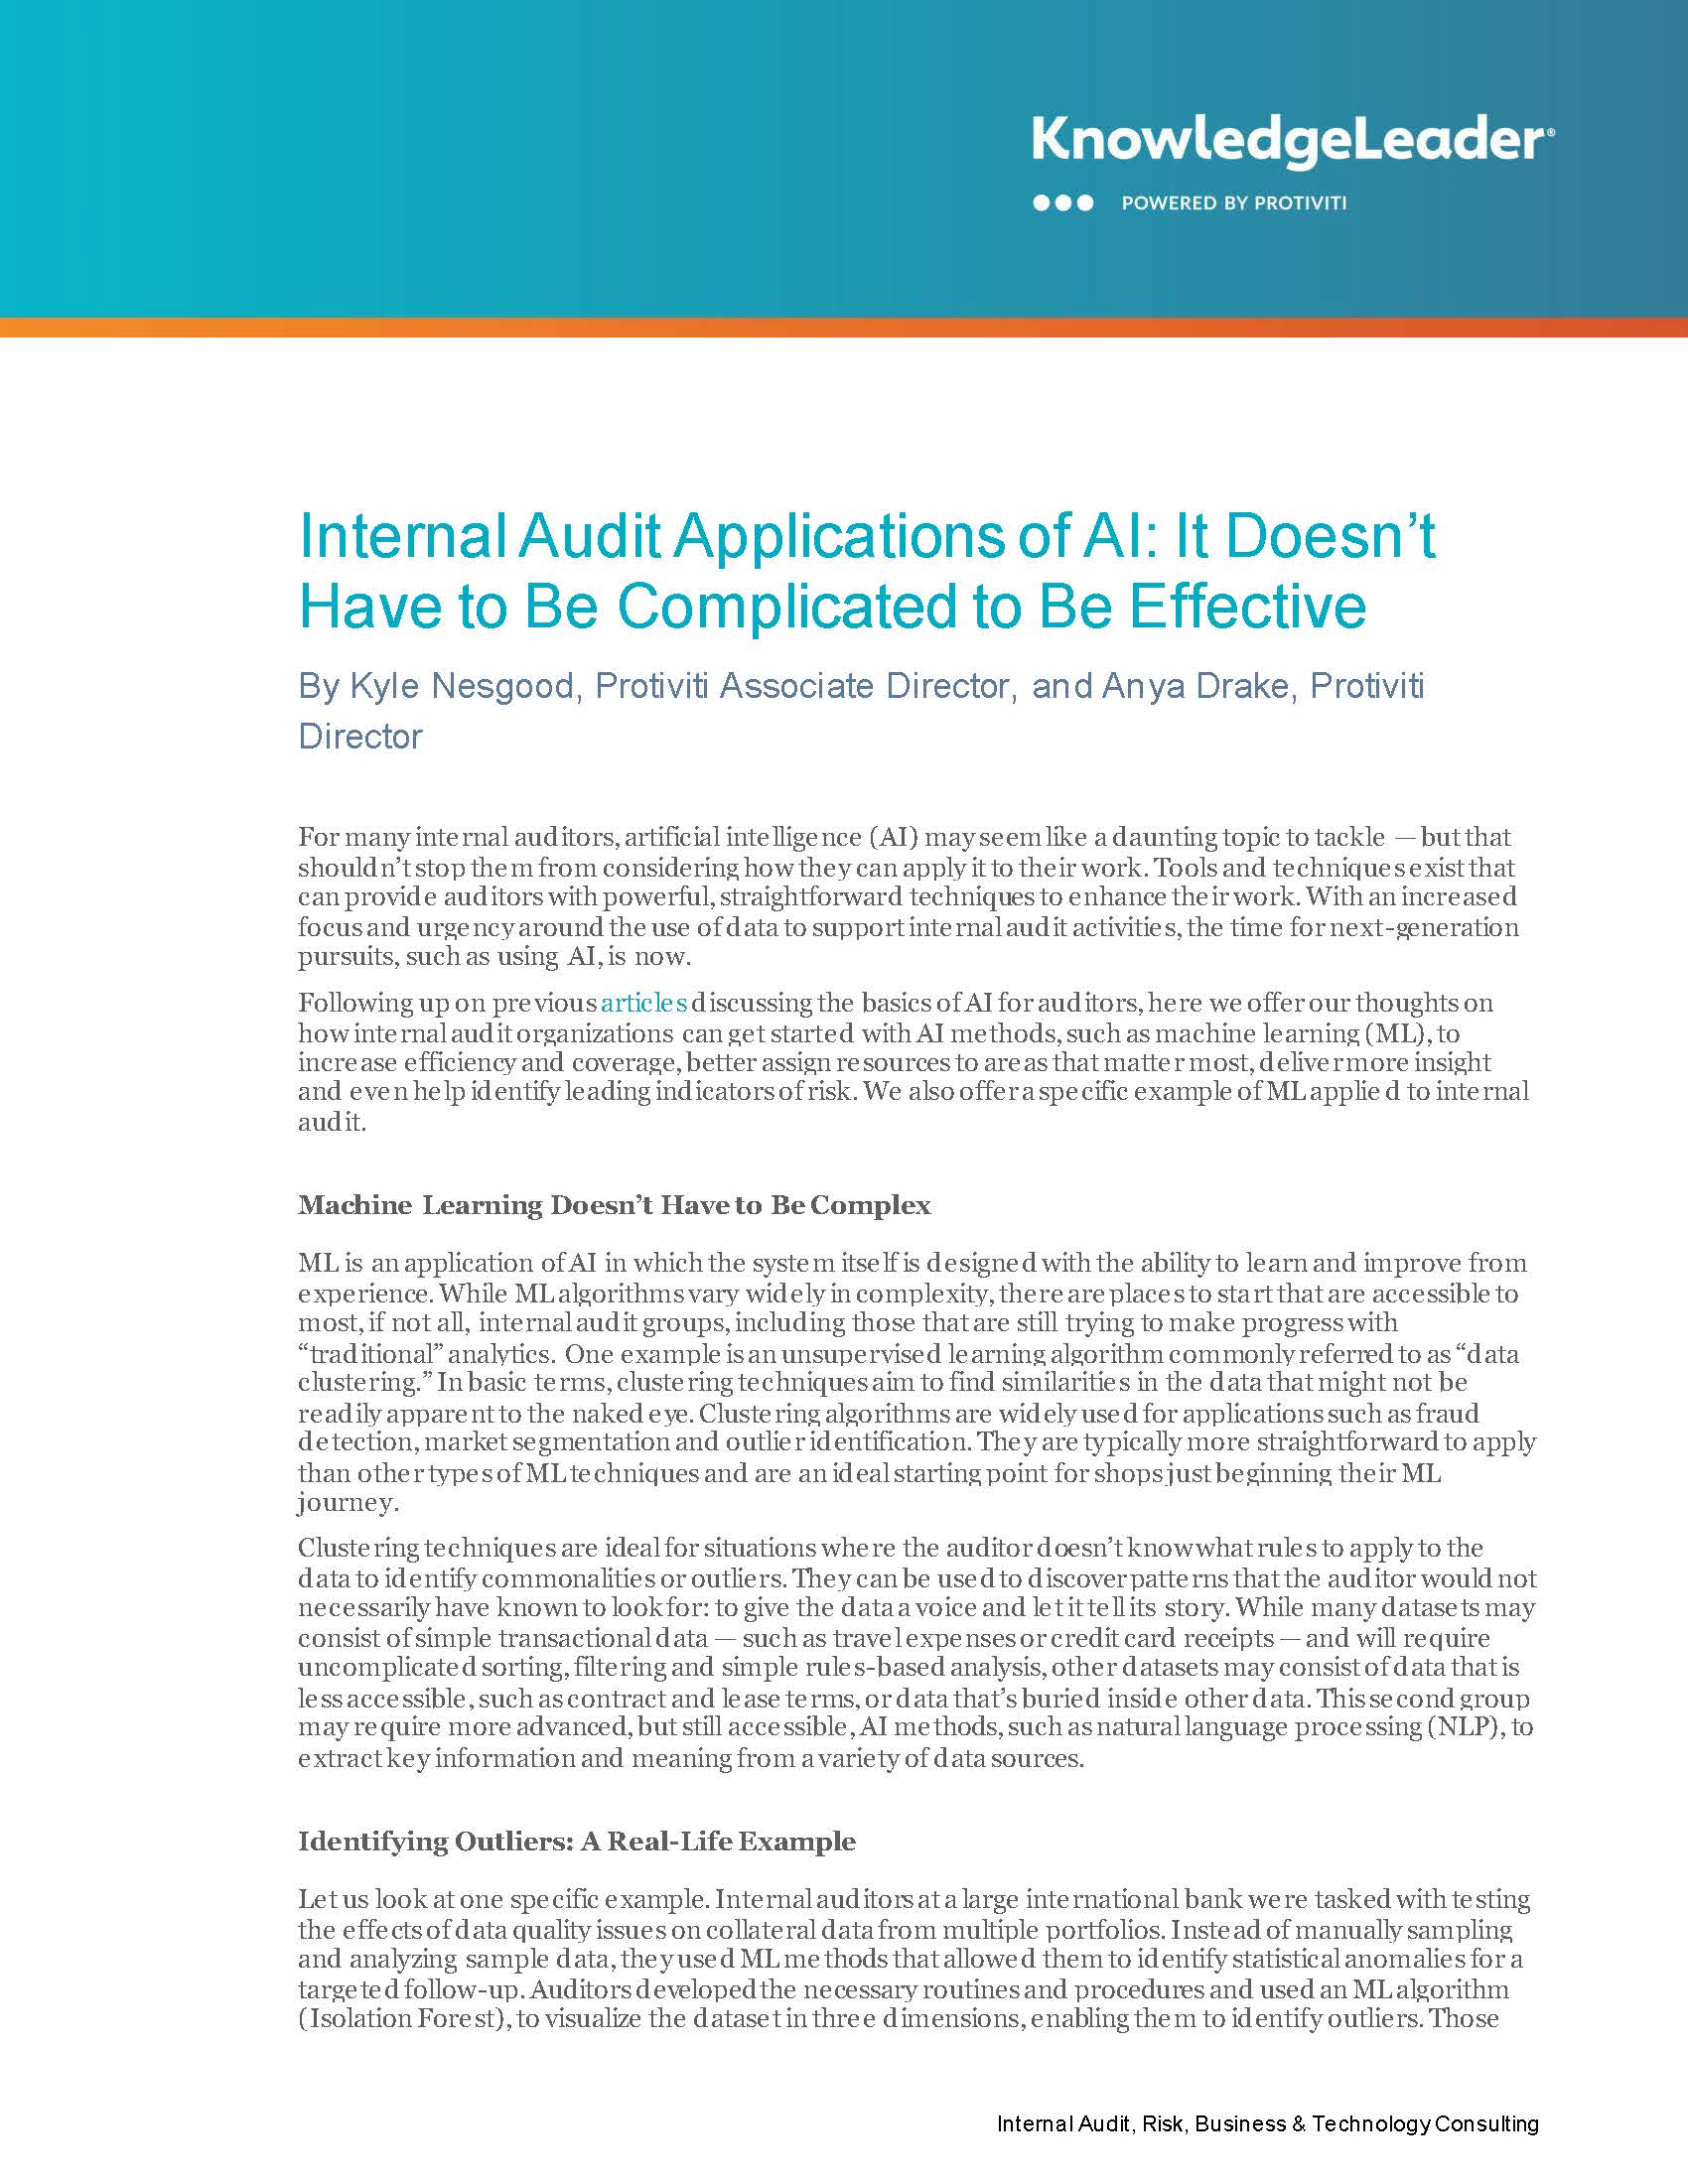 Internal Audit Applications of AI: It Doesn’t Have to Be Complicated to Be Effective